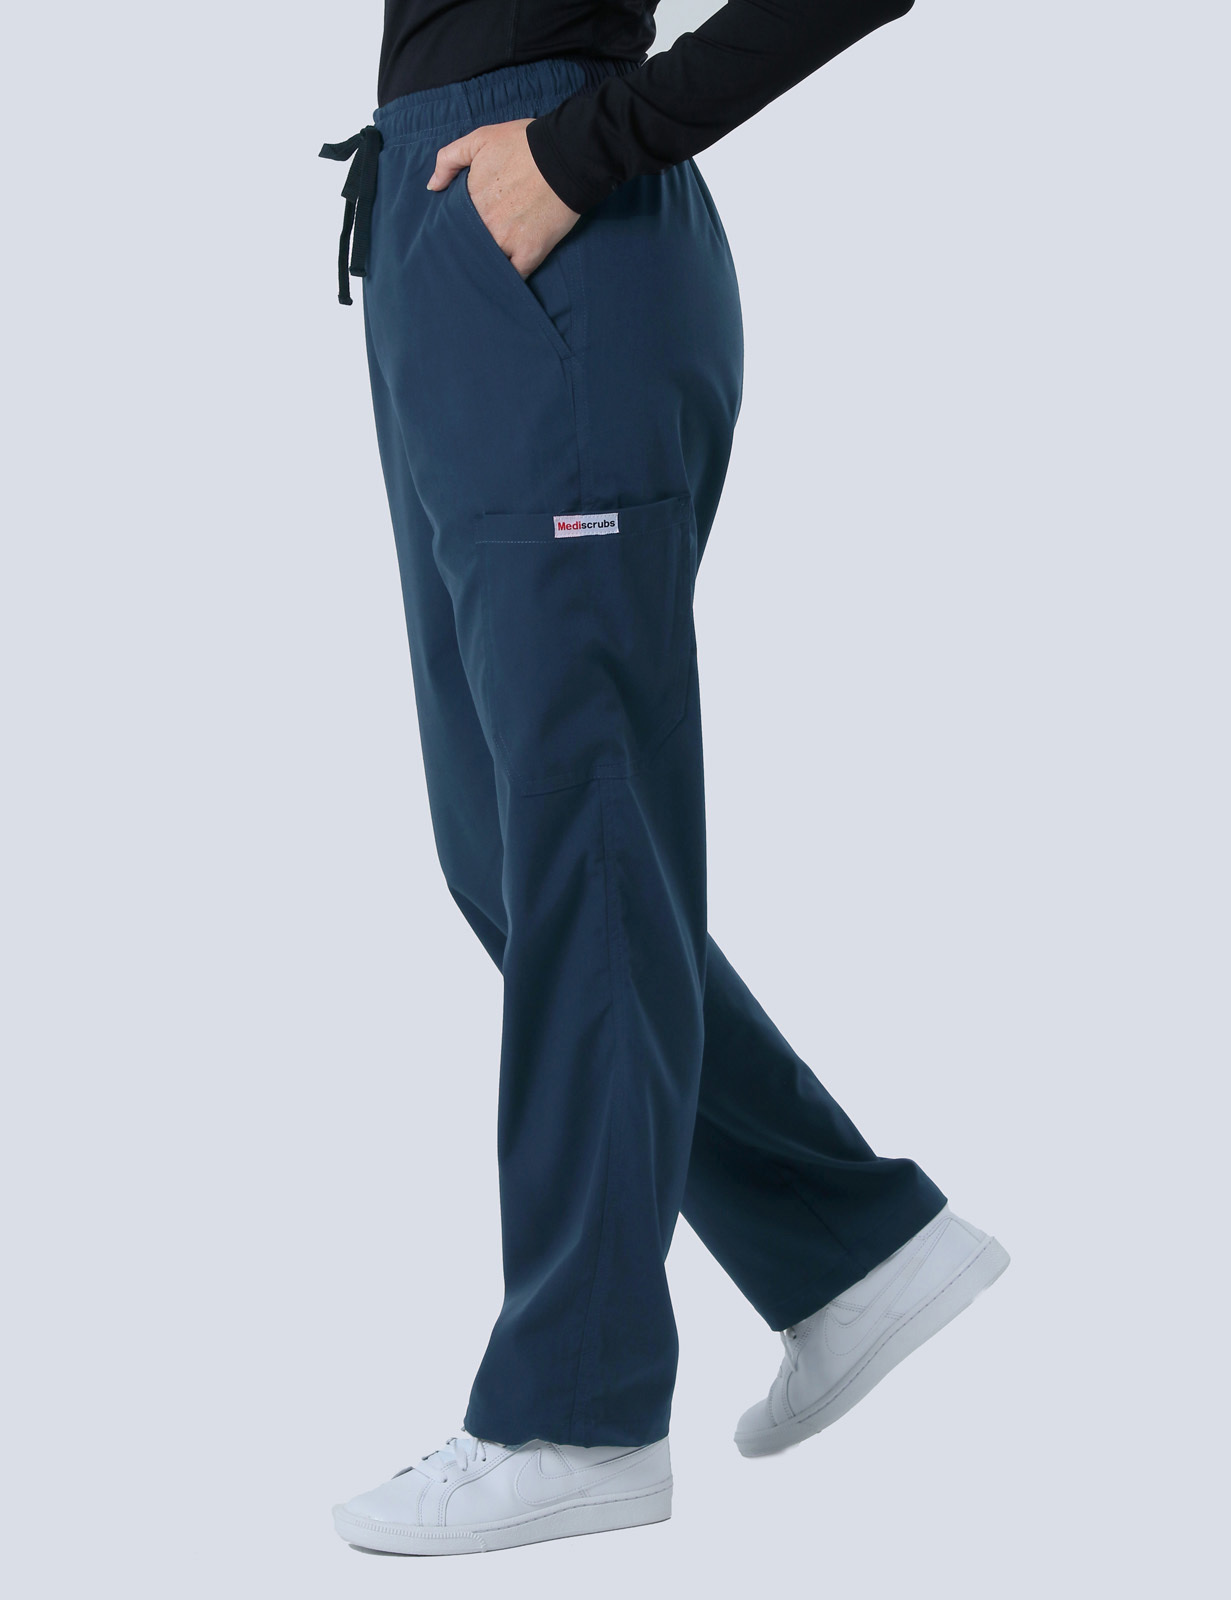 Regional Queensland Clinical Nurse Consultant (4 Pocket Top and Cargo Pants in Navy incl Logos) 